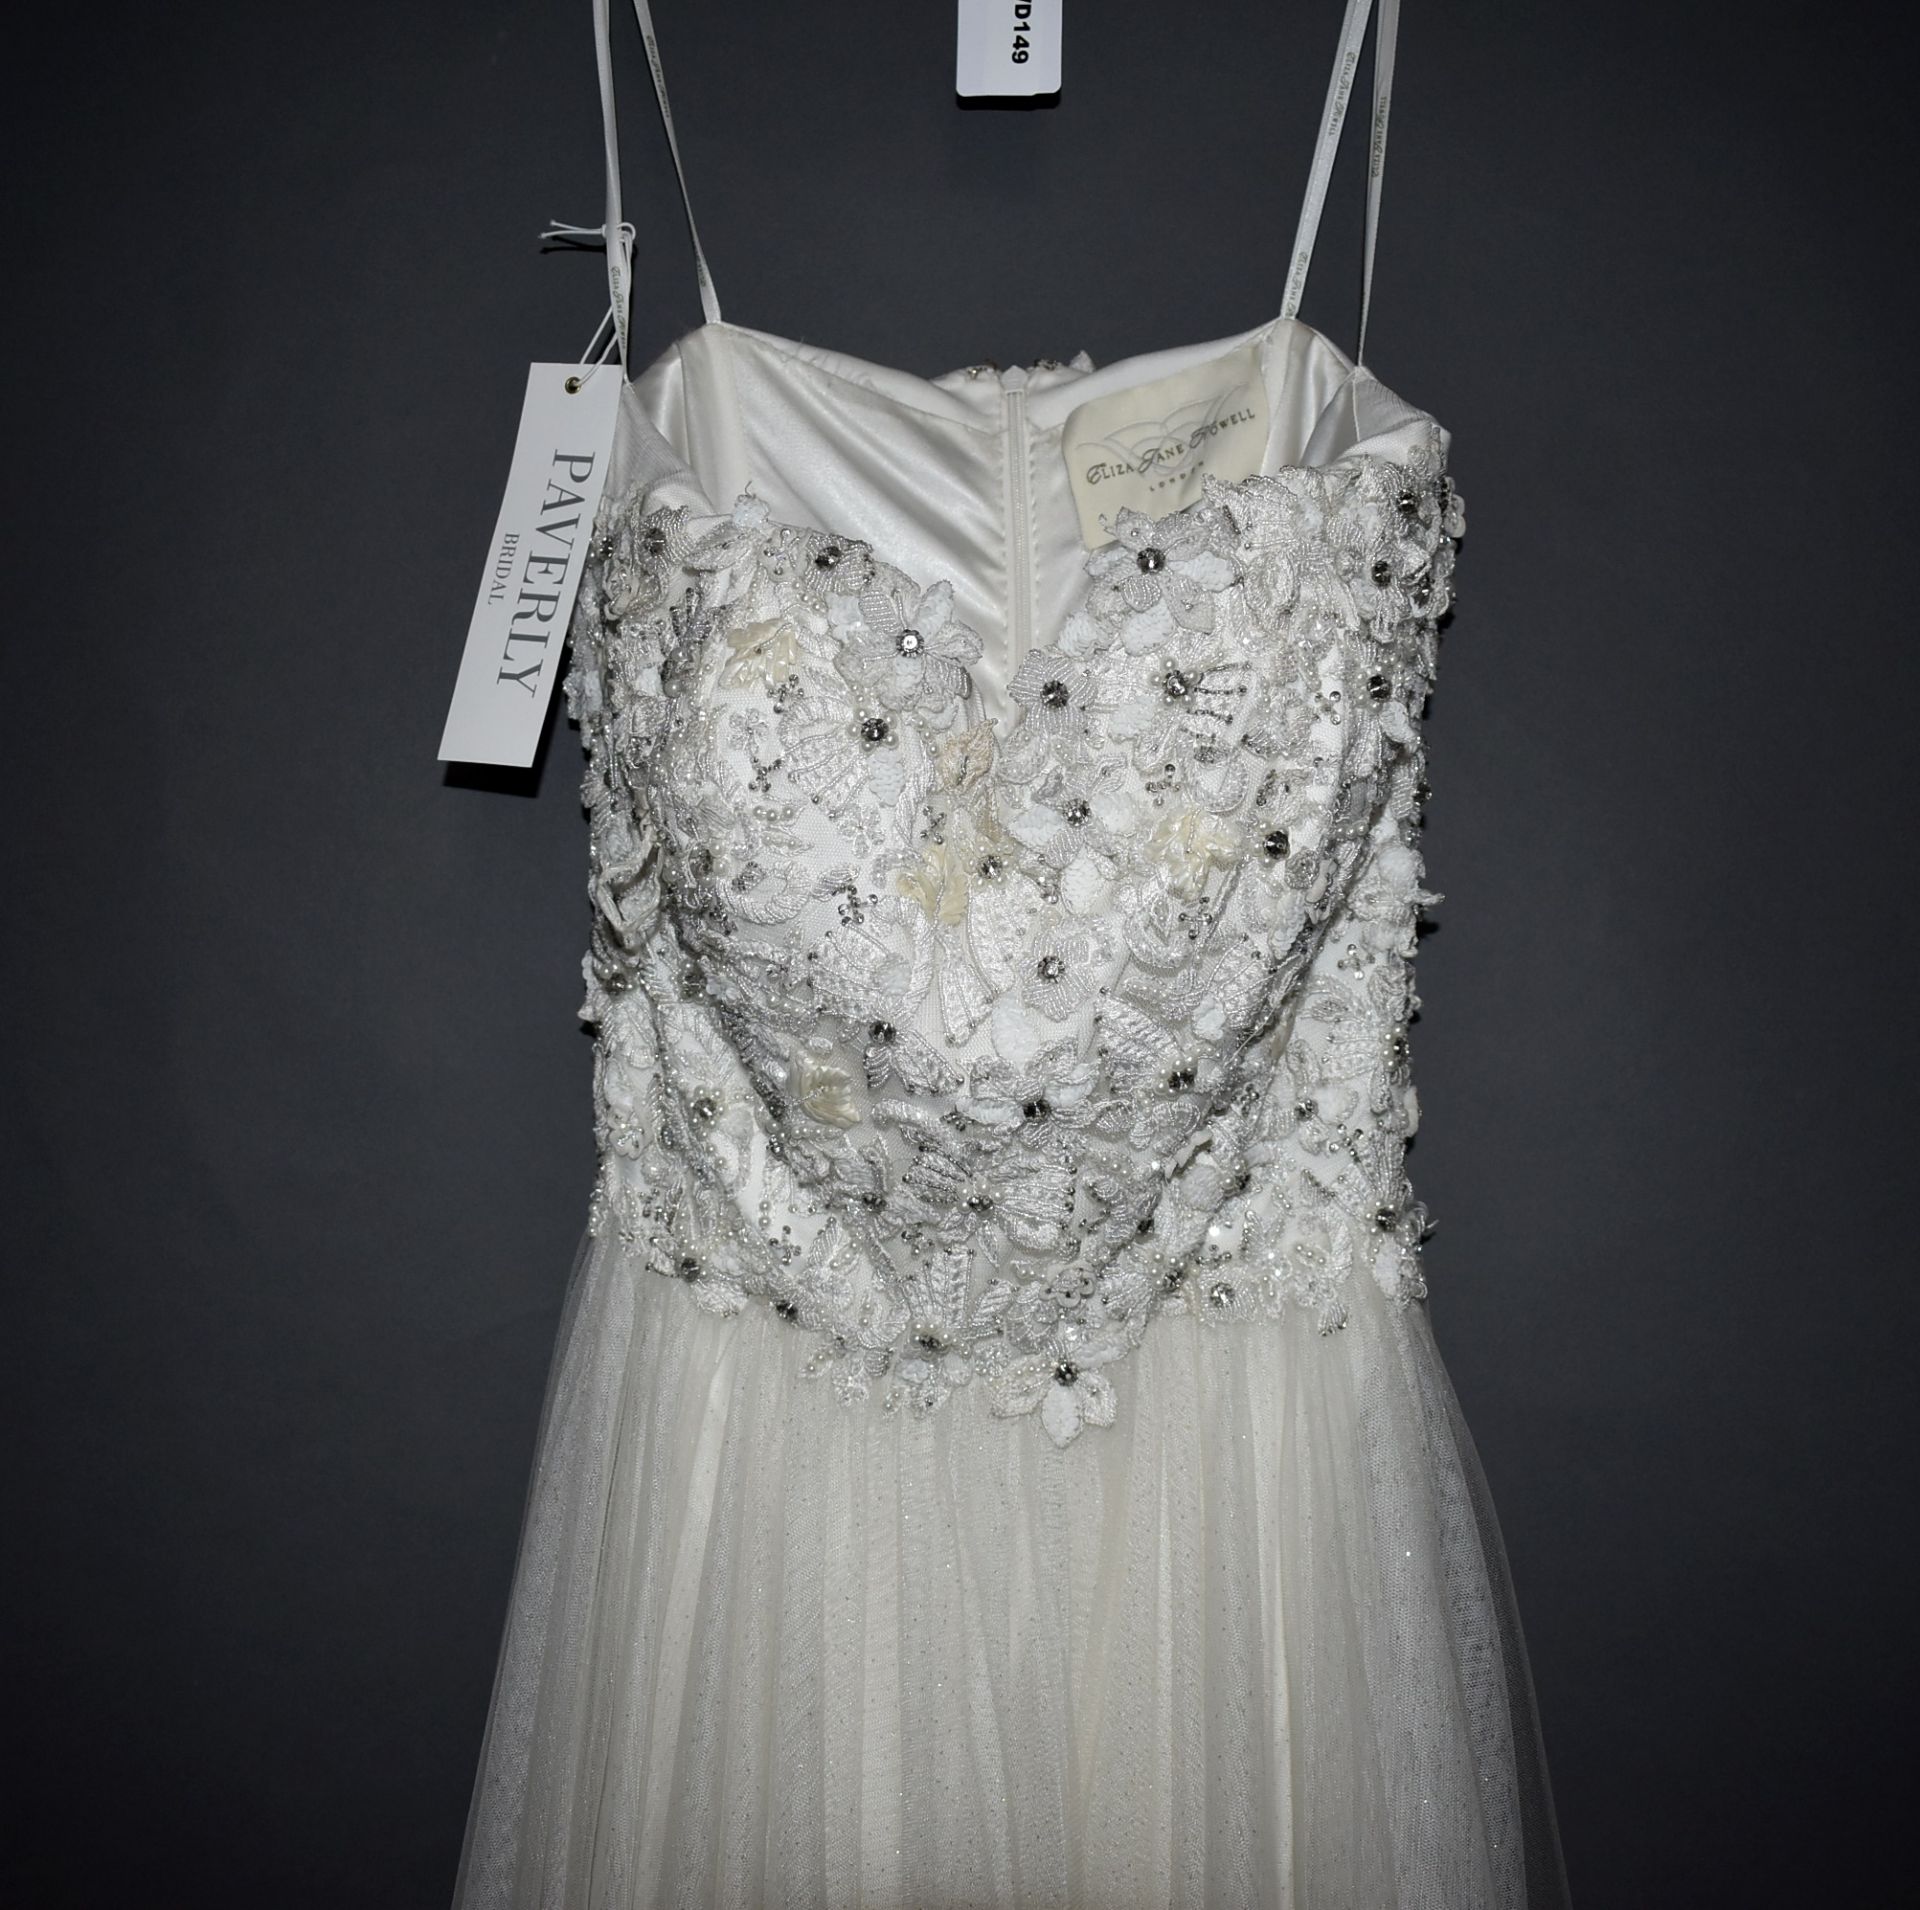 1 x ELIZA JANE HOWELL Lace And Beaded Strapless Designer Wedding Dress Bridal Gown RRP £1,000 UK 12 - Image 6 of 7